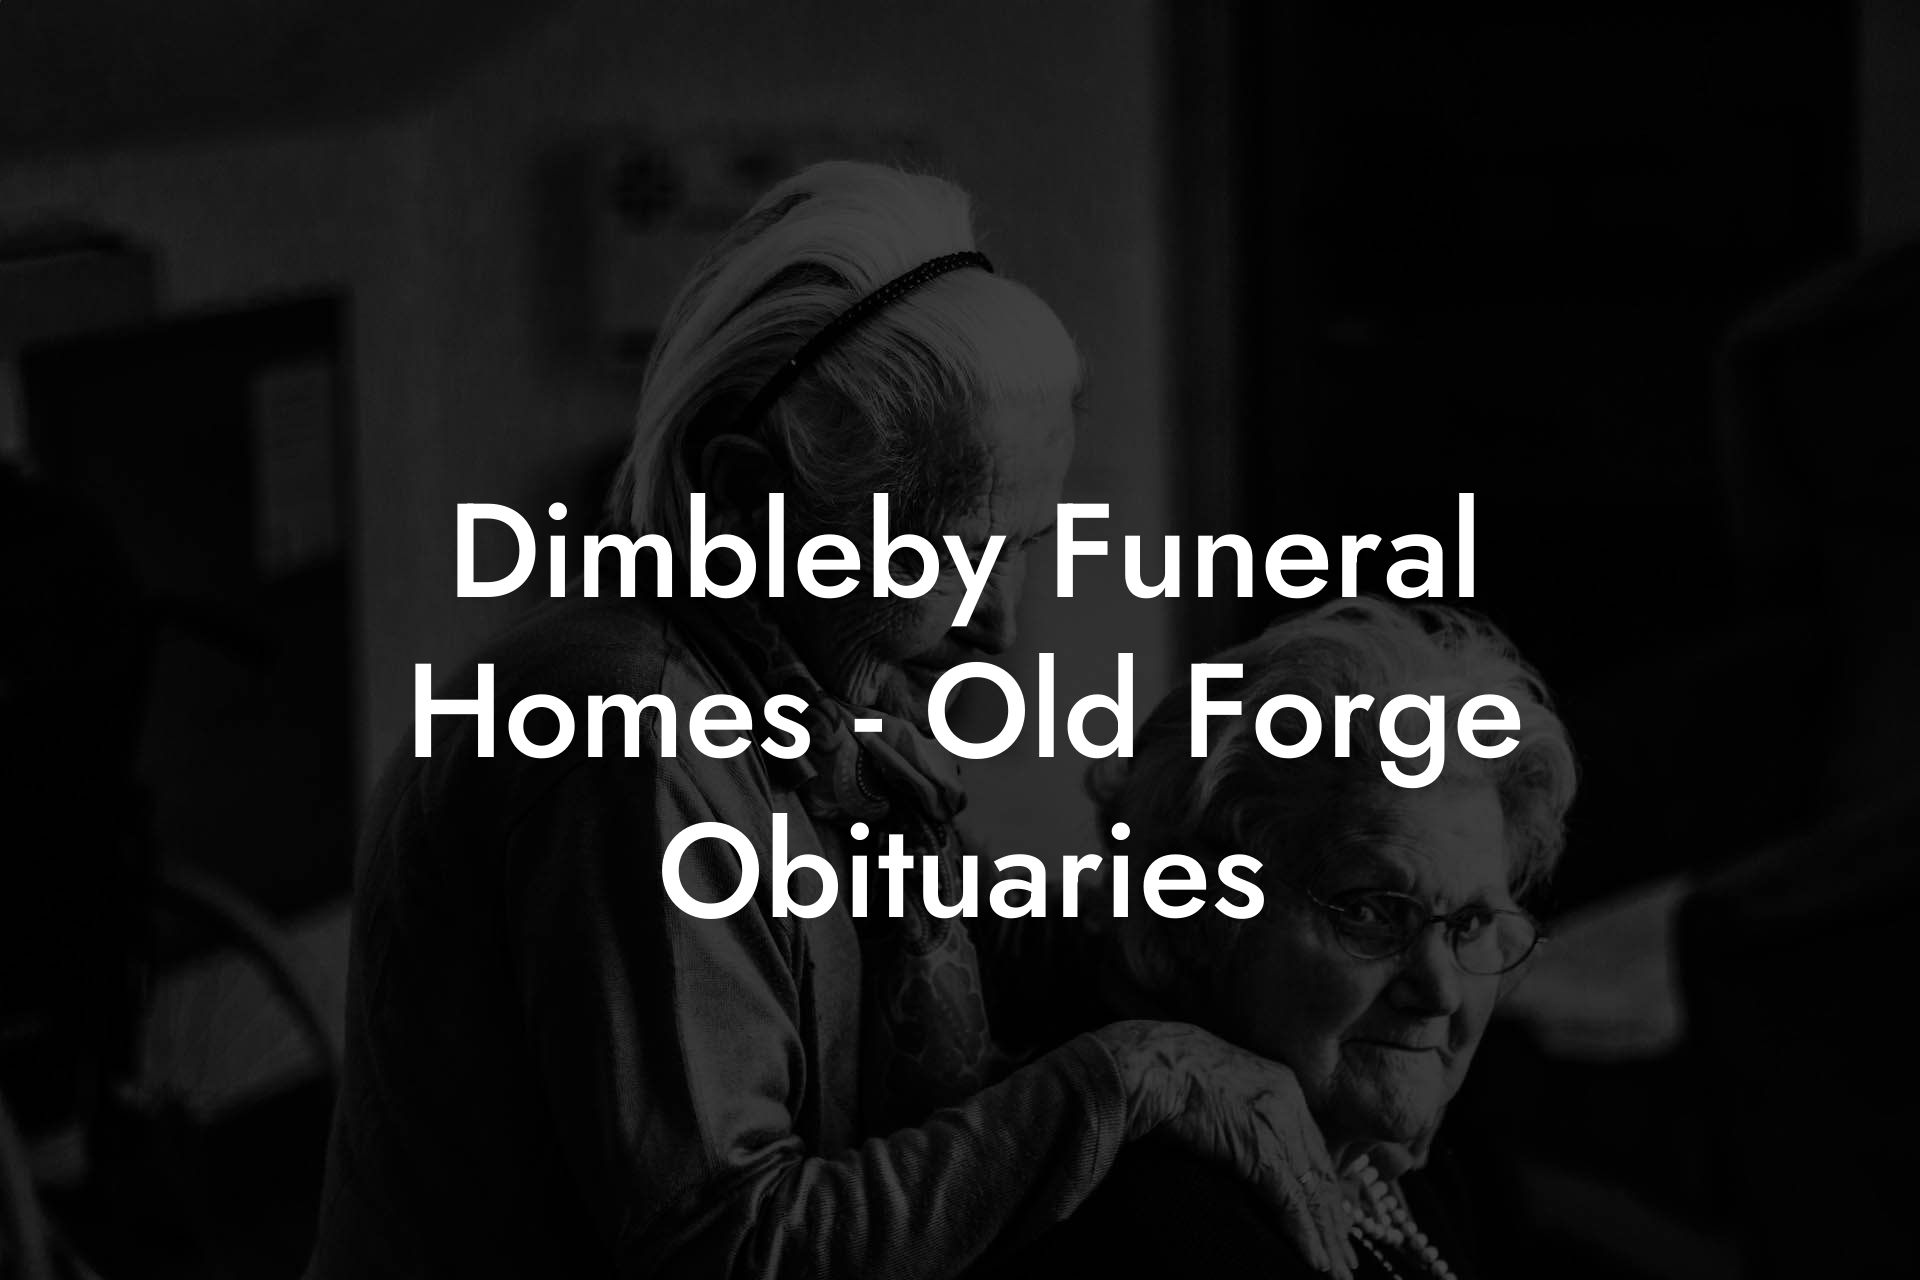 Dimbleby Funeral Homes - Old Forge Obituaries